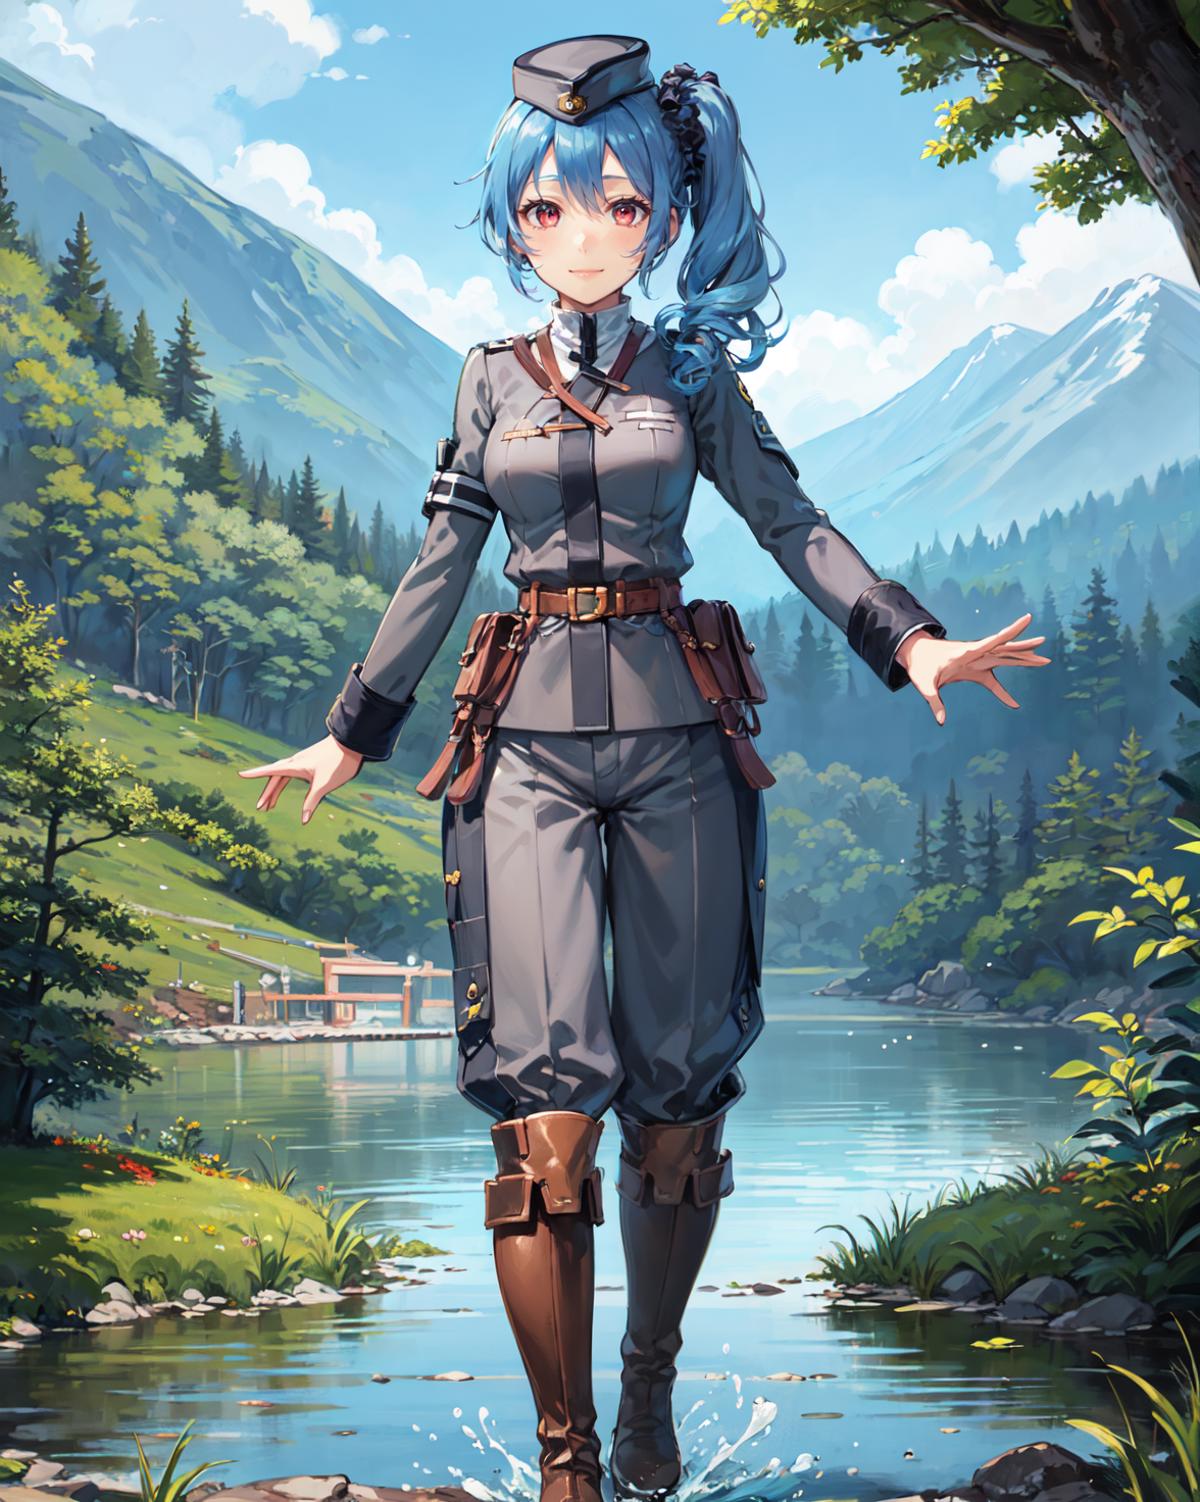 Claire Rieveldt / クレア・リーヴェルト (Trails of Cold Steel / Sen no Kiseki) image by irrel